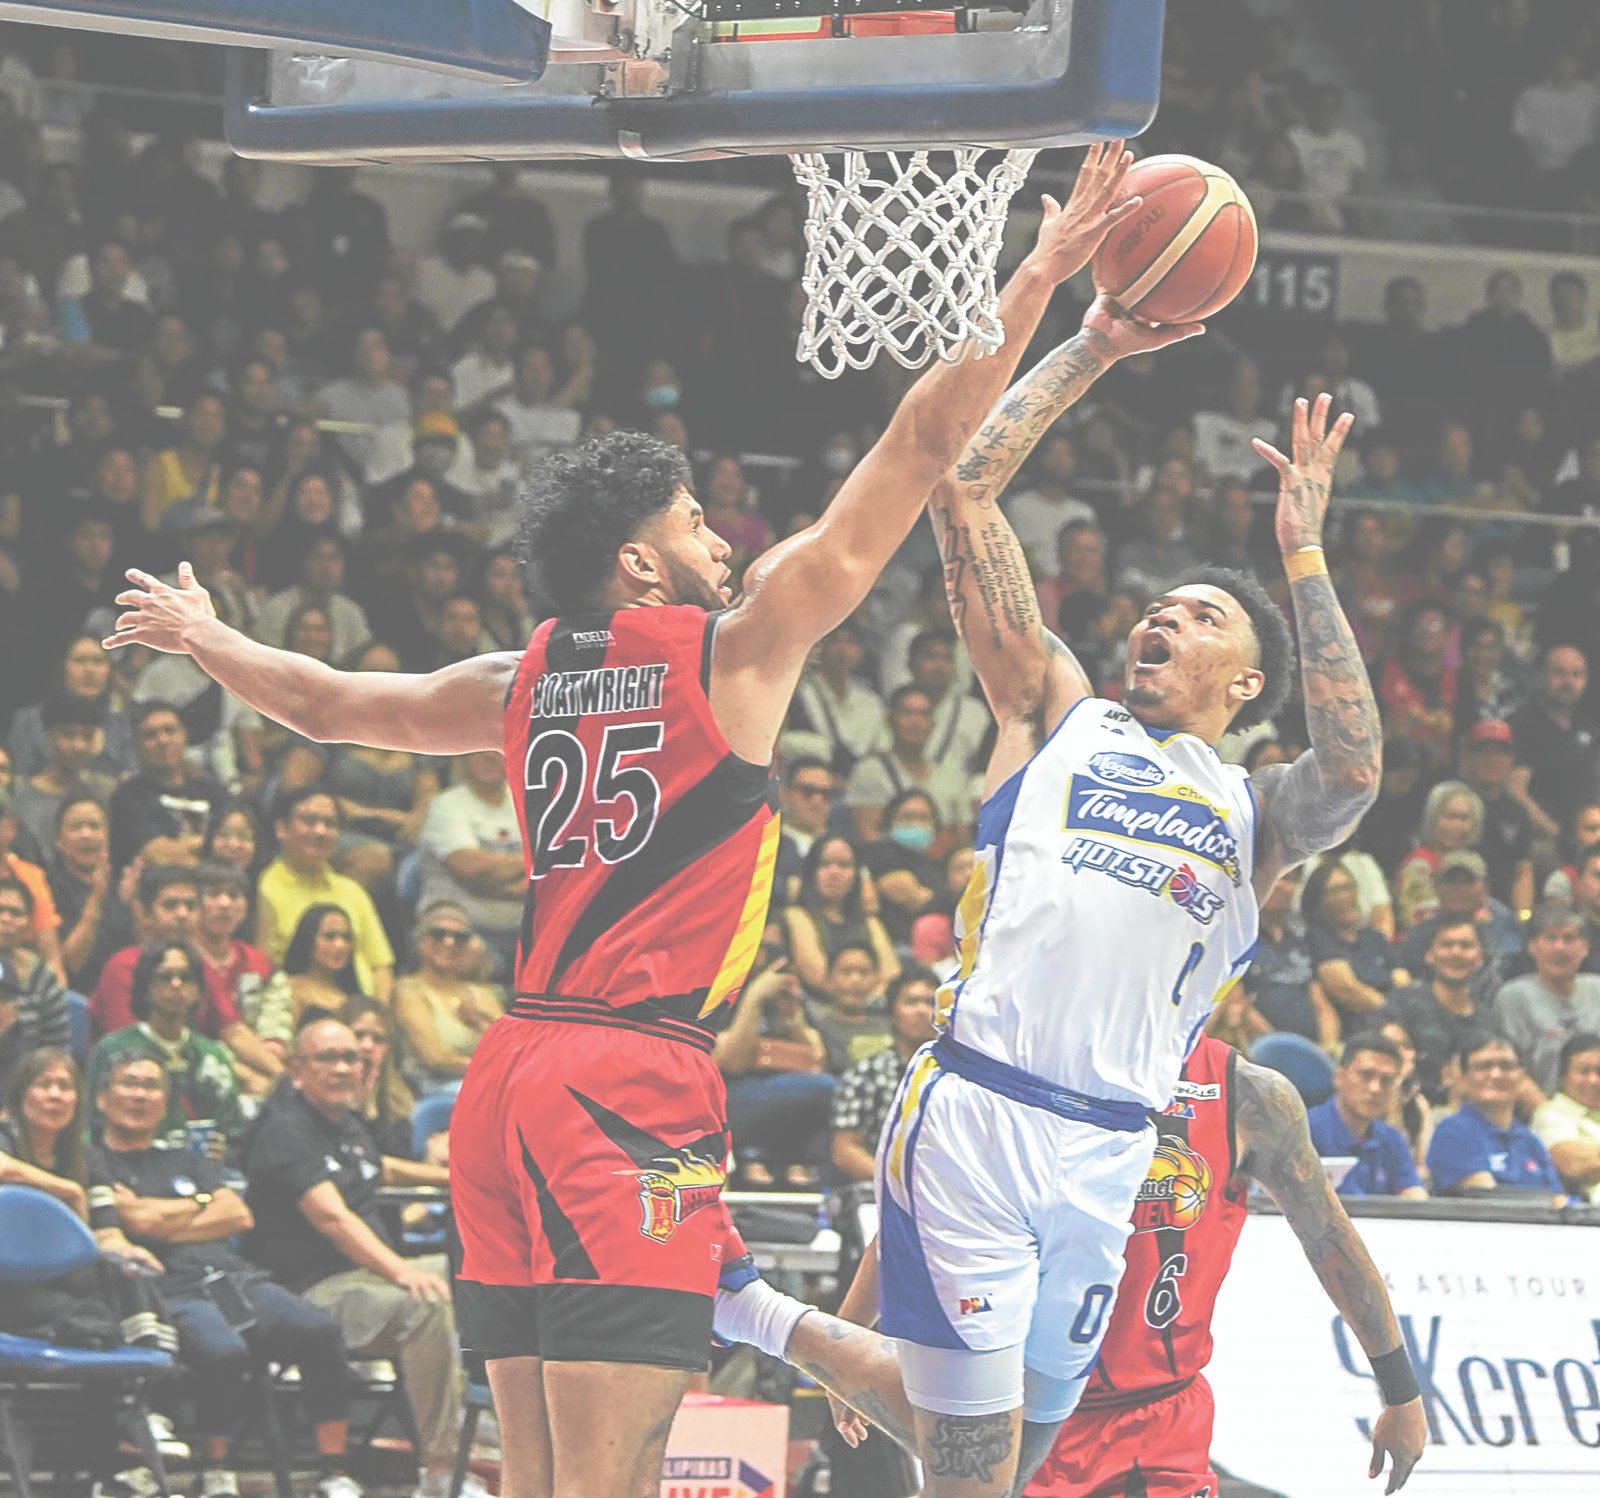 In a title series that has so far been played in streaks, Beermen try to ring death knell for Hotshots